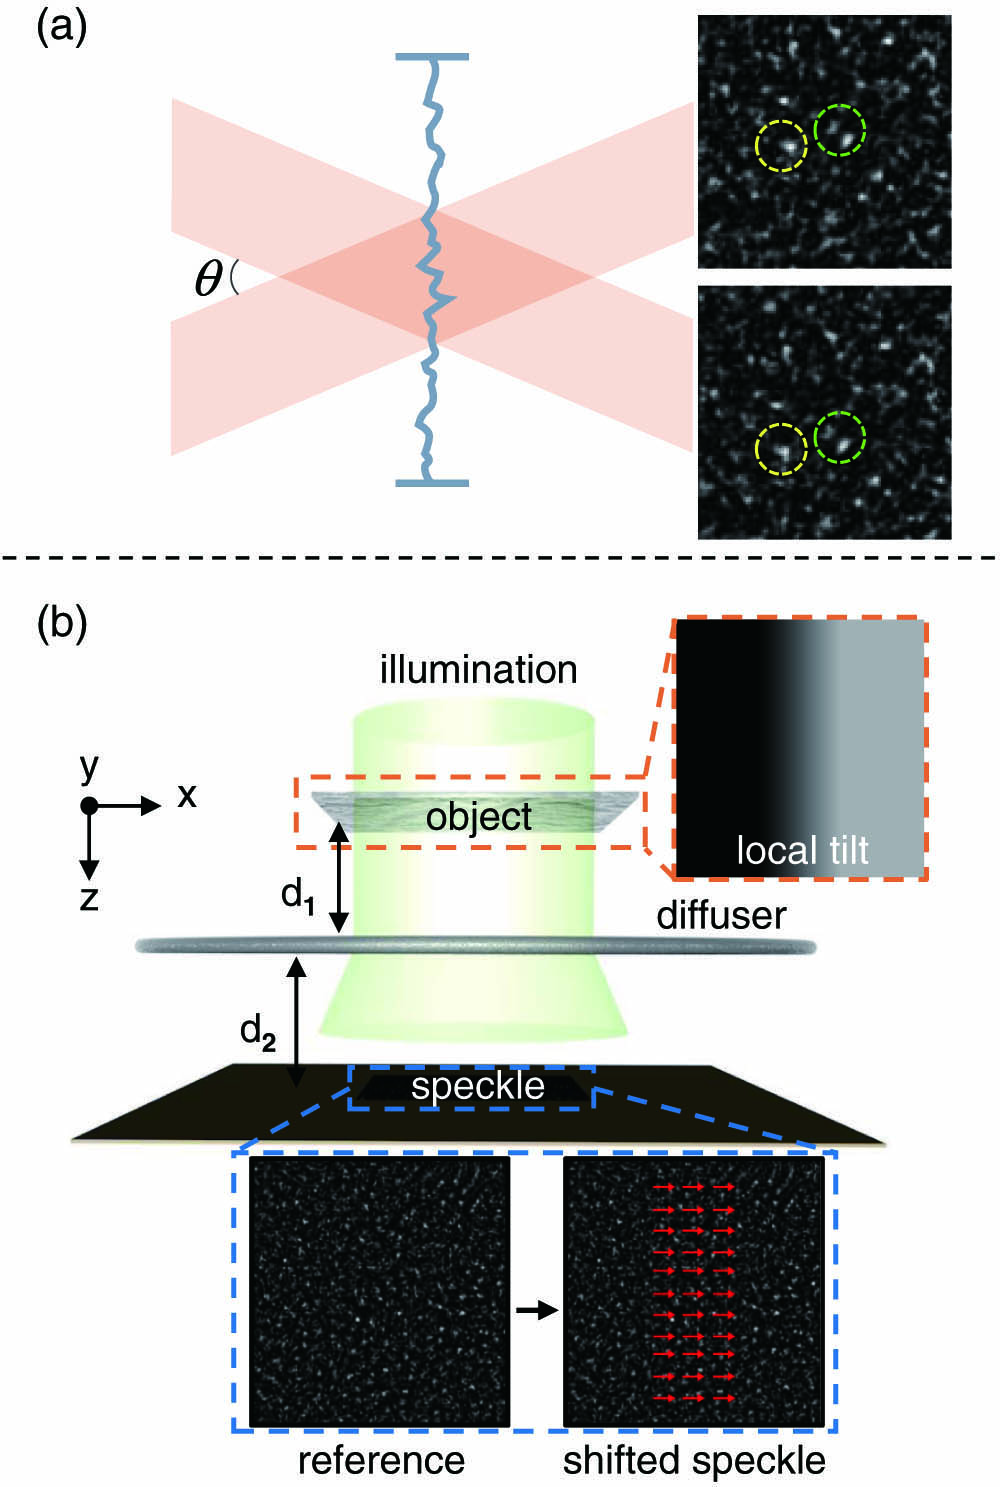 (a) Beam passes through an ideal random phase mask with negligible thickness and speckles generated by two light beams with different incident angles. The two speckle patterns show high similarity, and the speckle grains in the circles indicate the same local features. (b) Conceptual demonstration of the optical memory effect. Placing a phase object causes a local tilt of the incident light wavefront, which results in a partial translation of the speckle.